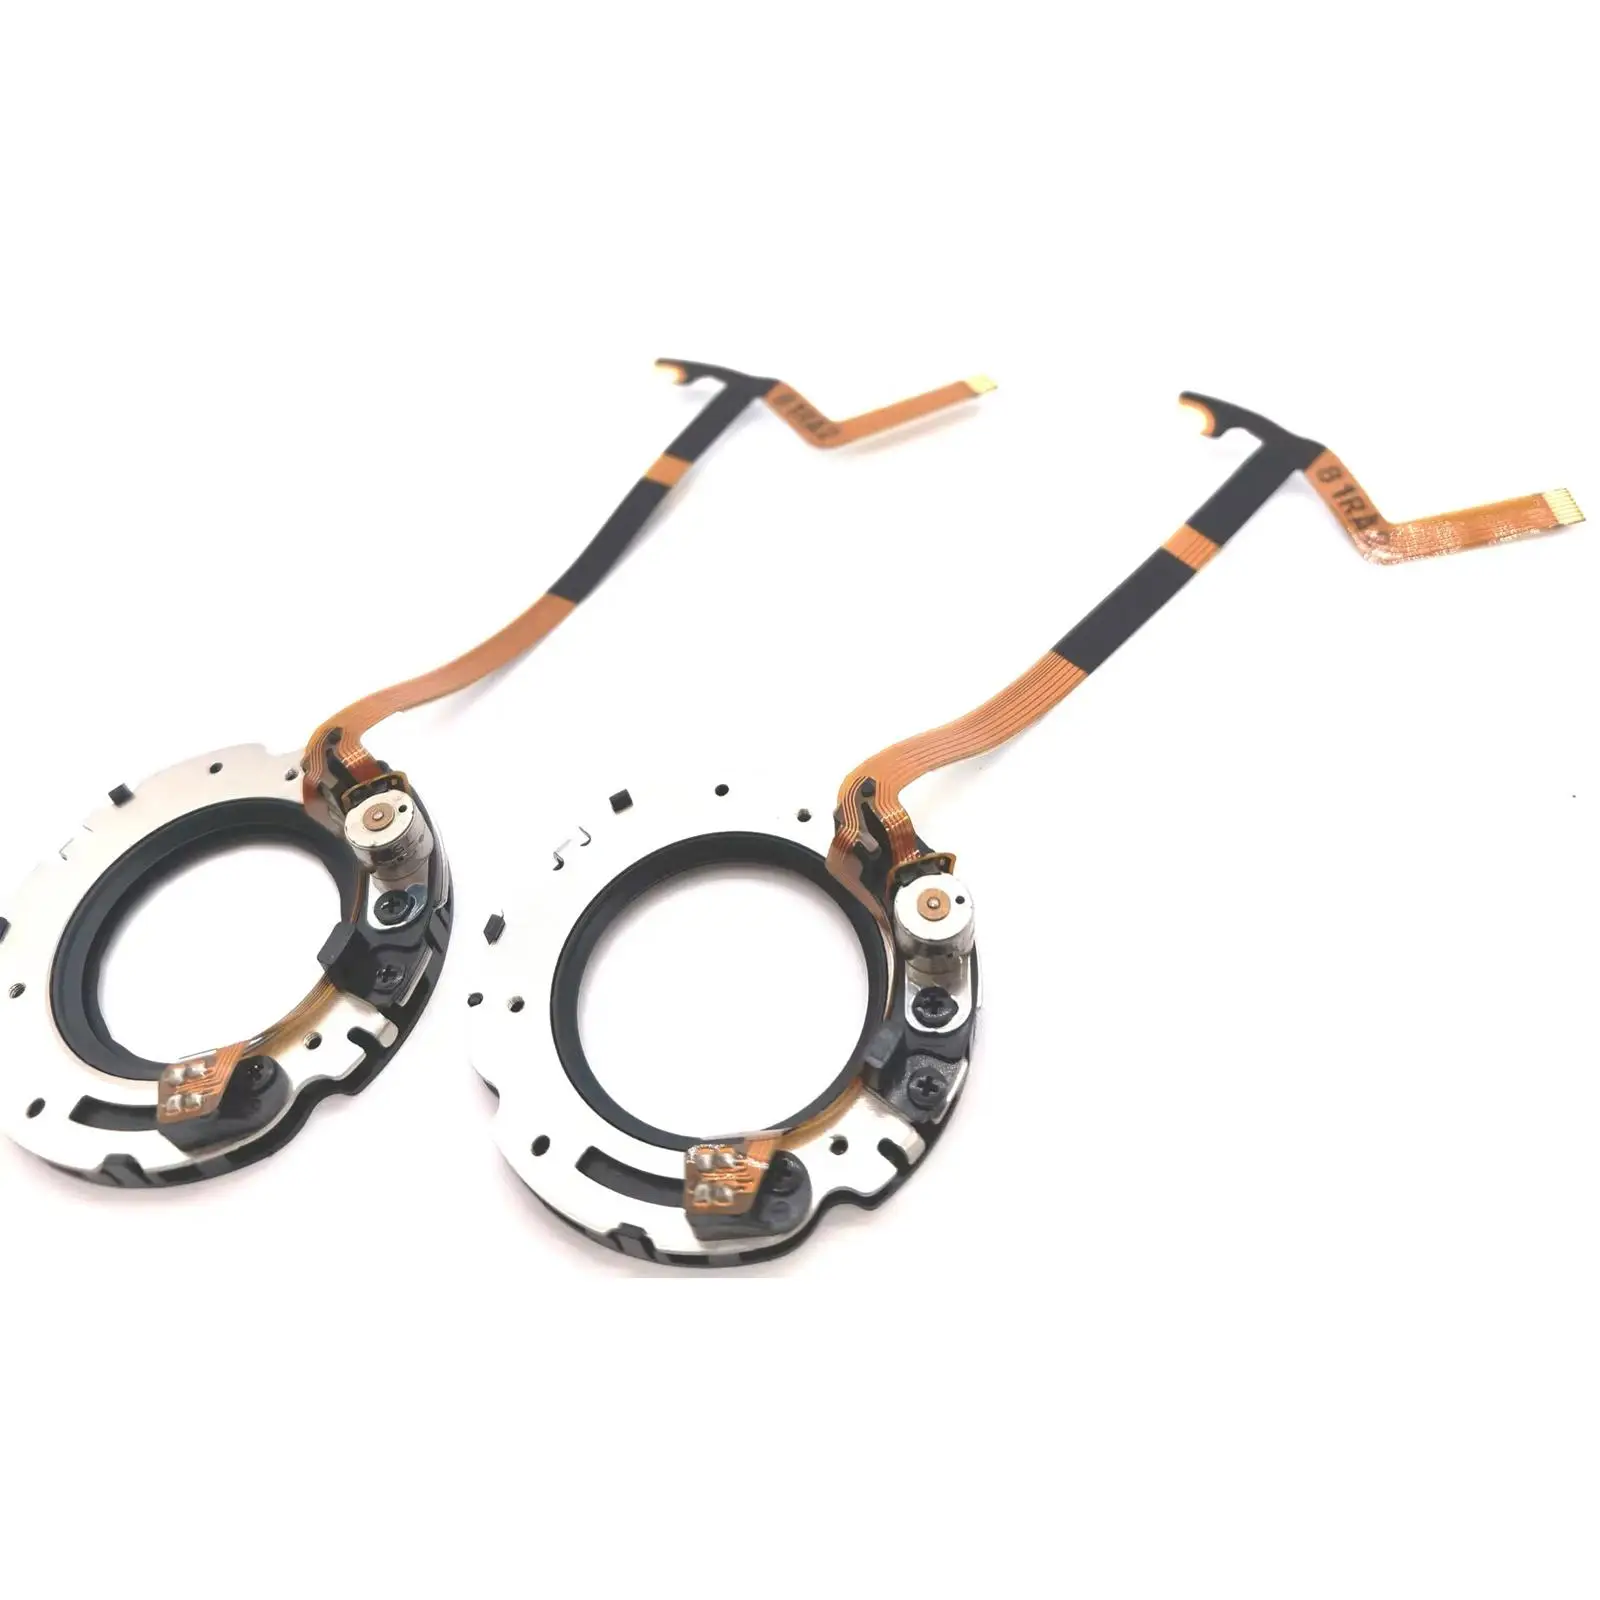 Lens Aperture Assembly Flex Cable for Canon 24-105 4L F4 IS Usm Sturdy Easy to Install Professional High Performance